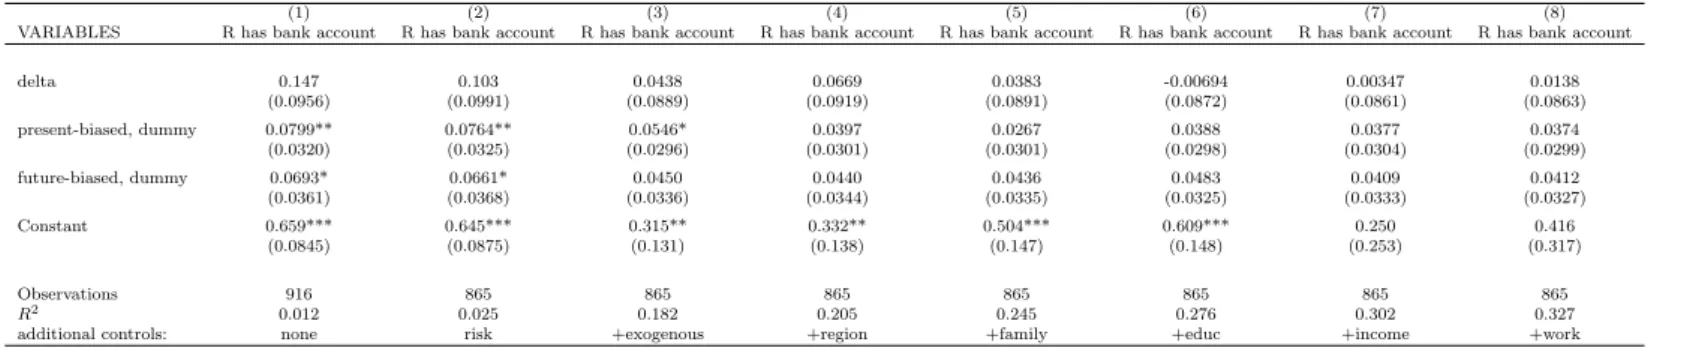 Table 12: The association of time preference with the probability of having a bank account, OLS